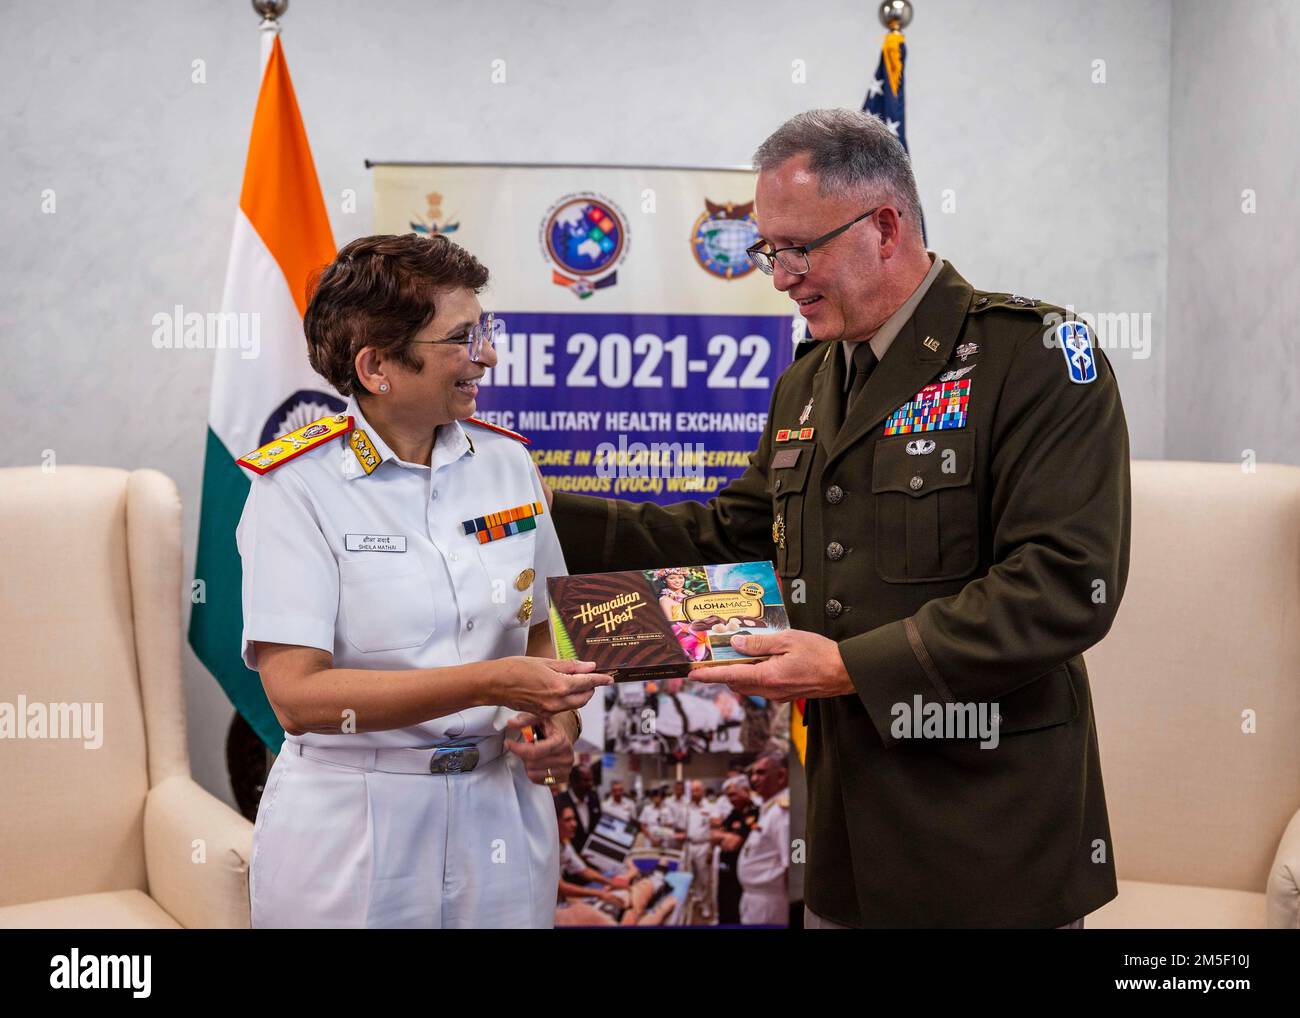 220309-N-XC372-1363 NEW DELHI (Mar. 9, 2022) Maj. Gen. Michael Place, Commanding General of 18th Medical Command, right, presents a gift to Surg V Adm Sheila S. Mothei, Director General of Organization and Personnel at the Armed Forces Medical Services, during the Indo-Pacific Military Health Exchange 2021-22. IPMHE 2021-22 is a multilateral premier military medical event co-hosted by India’s Armed Forces Medical Services and U.S. Indo-Pacific Command, where health professionals of various backgrounds integrate to develop relationships and shape global health engagement in the Indo-Pacific reg Stock Photo